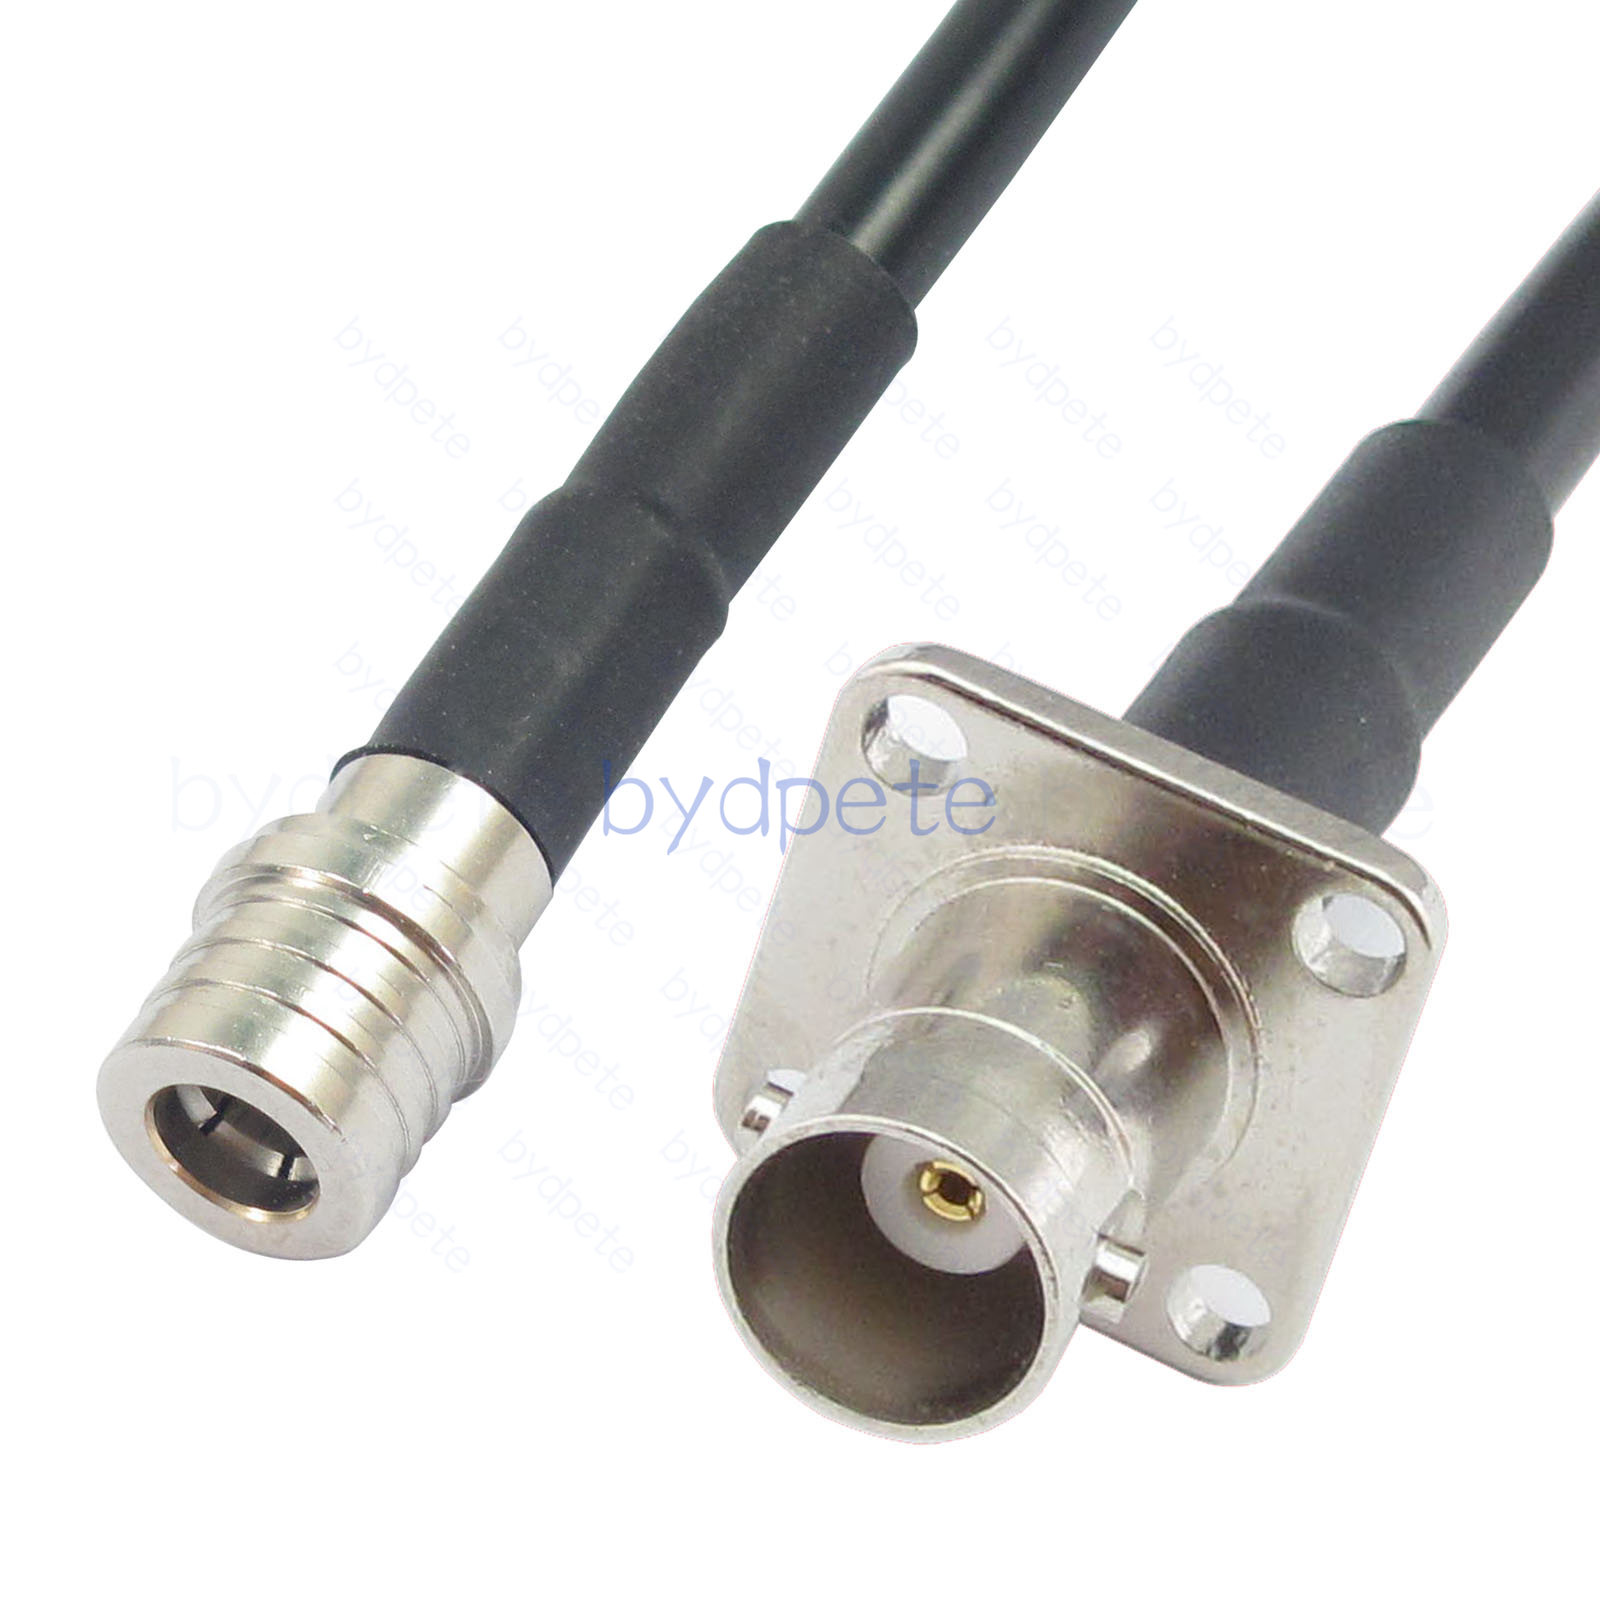 RG58 Cable QMA Male Plug Connector to BNC Female 4four hole panel RF Coax Coaxial Any length Lot bydpete BYDC514QMAMH458